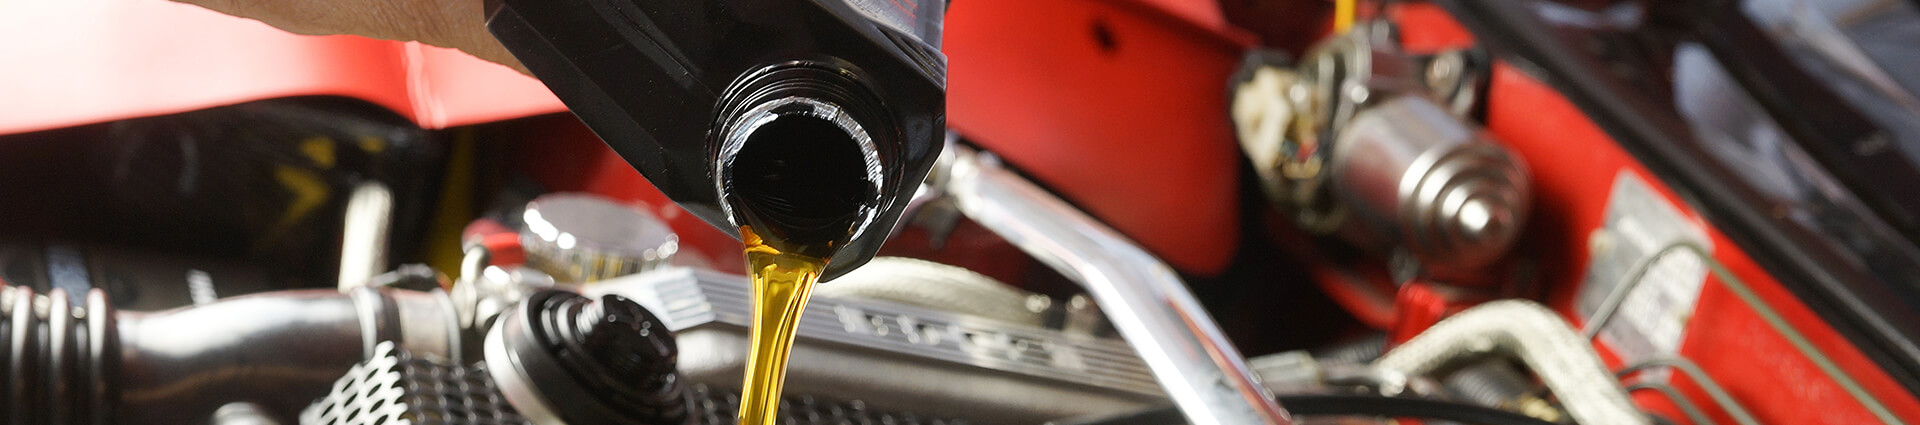 Oil Change Service | Oil Change Coupons | Oil Change Near Me